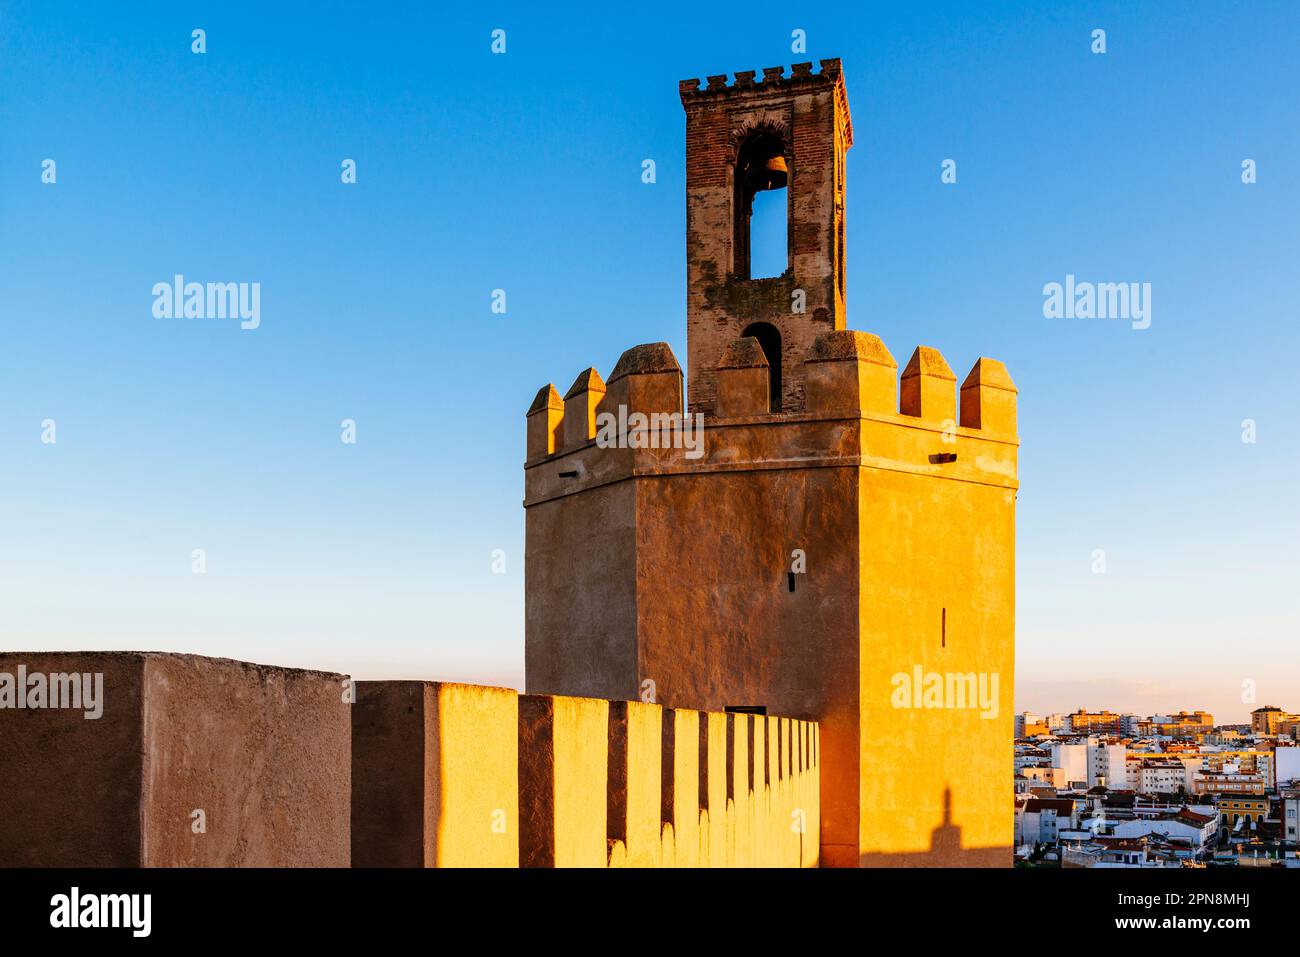 The Torre de Espantaperros or Torre de la Atalaya, is a watchtower located next to the citadel of Badajoz, 10th century. It is of Almohad origin and h Stock Photo